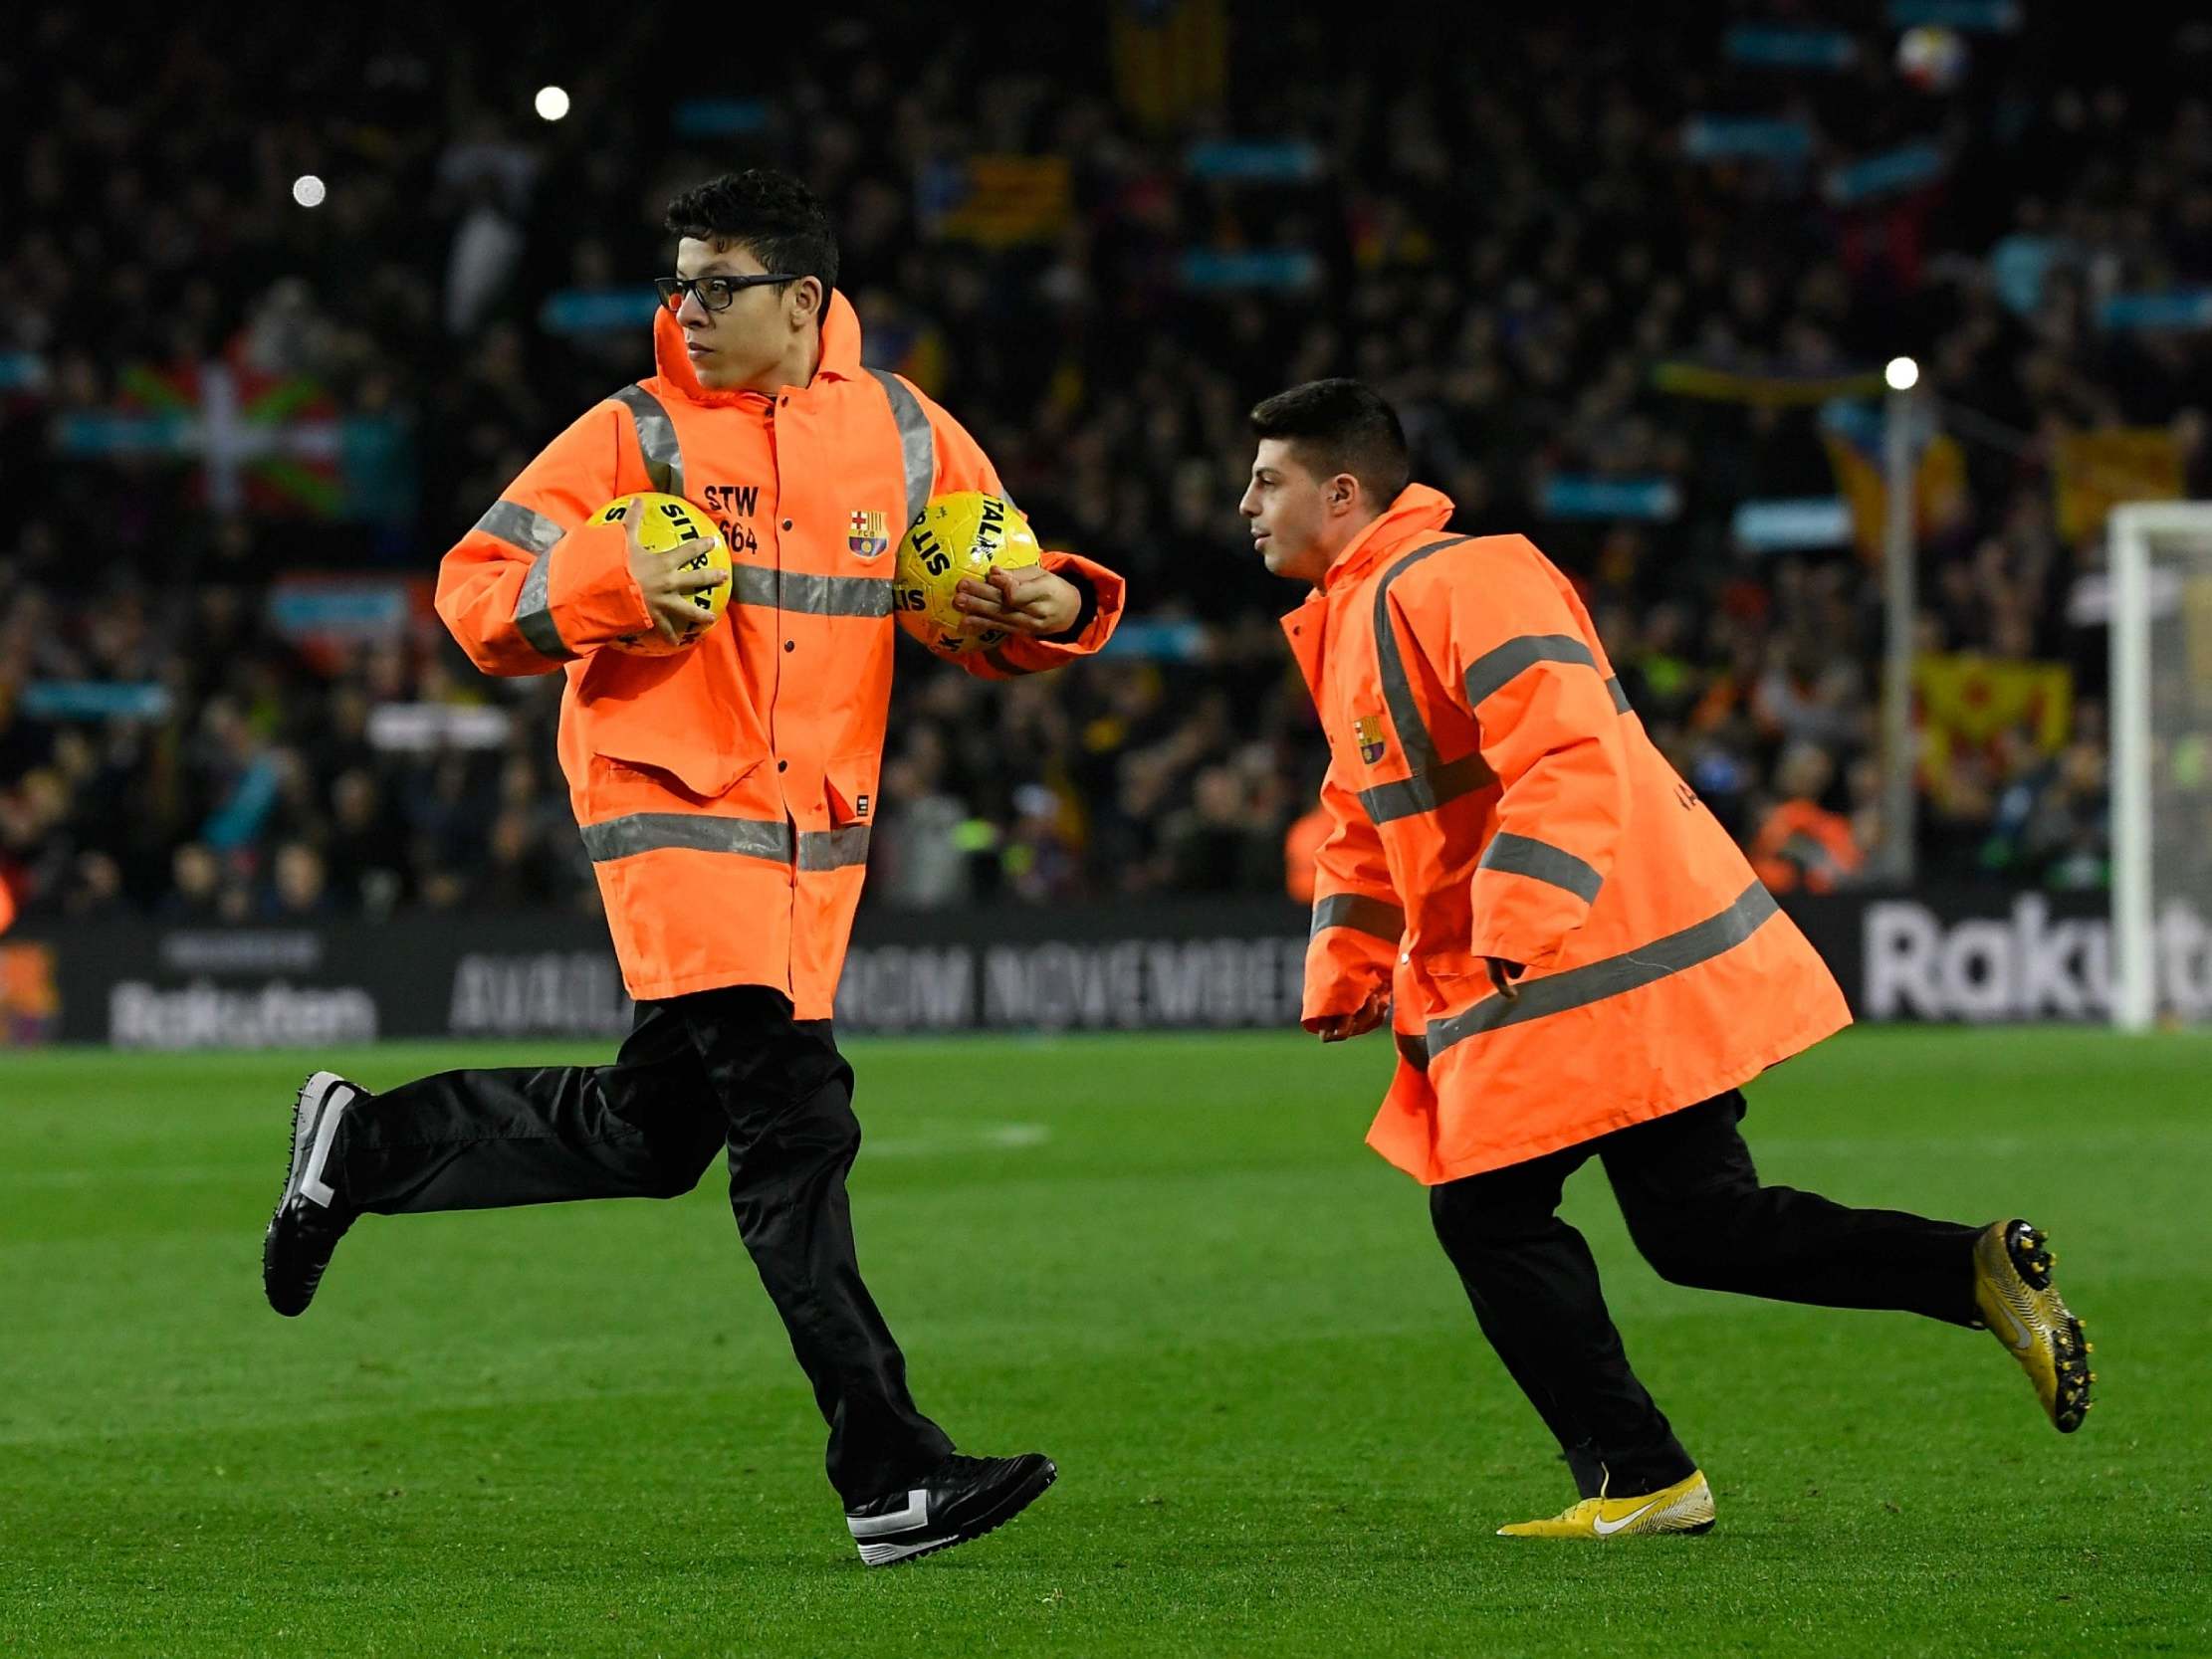 Protesters forced the Clasico to be temporarily halted by throwing balls onto the pitch